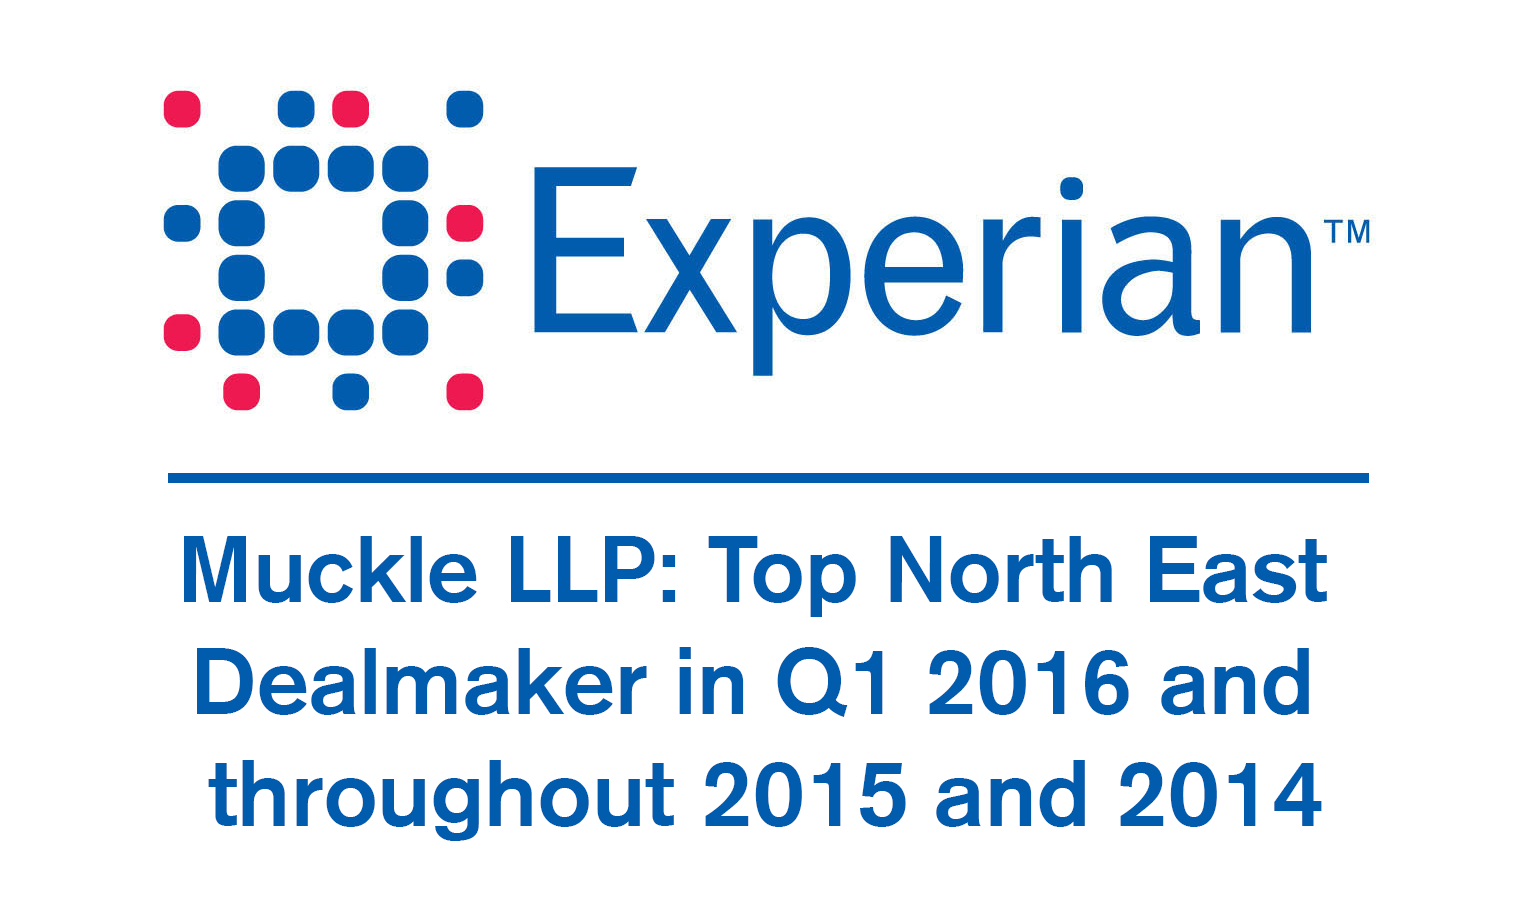 Muckle LLP remains the North East's number one dealmaker